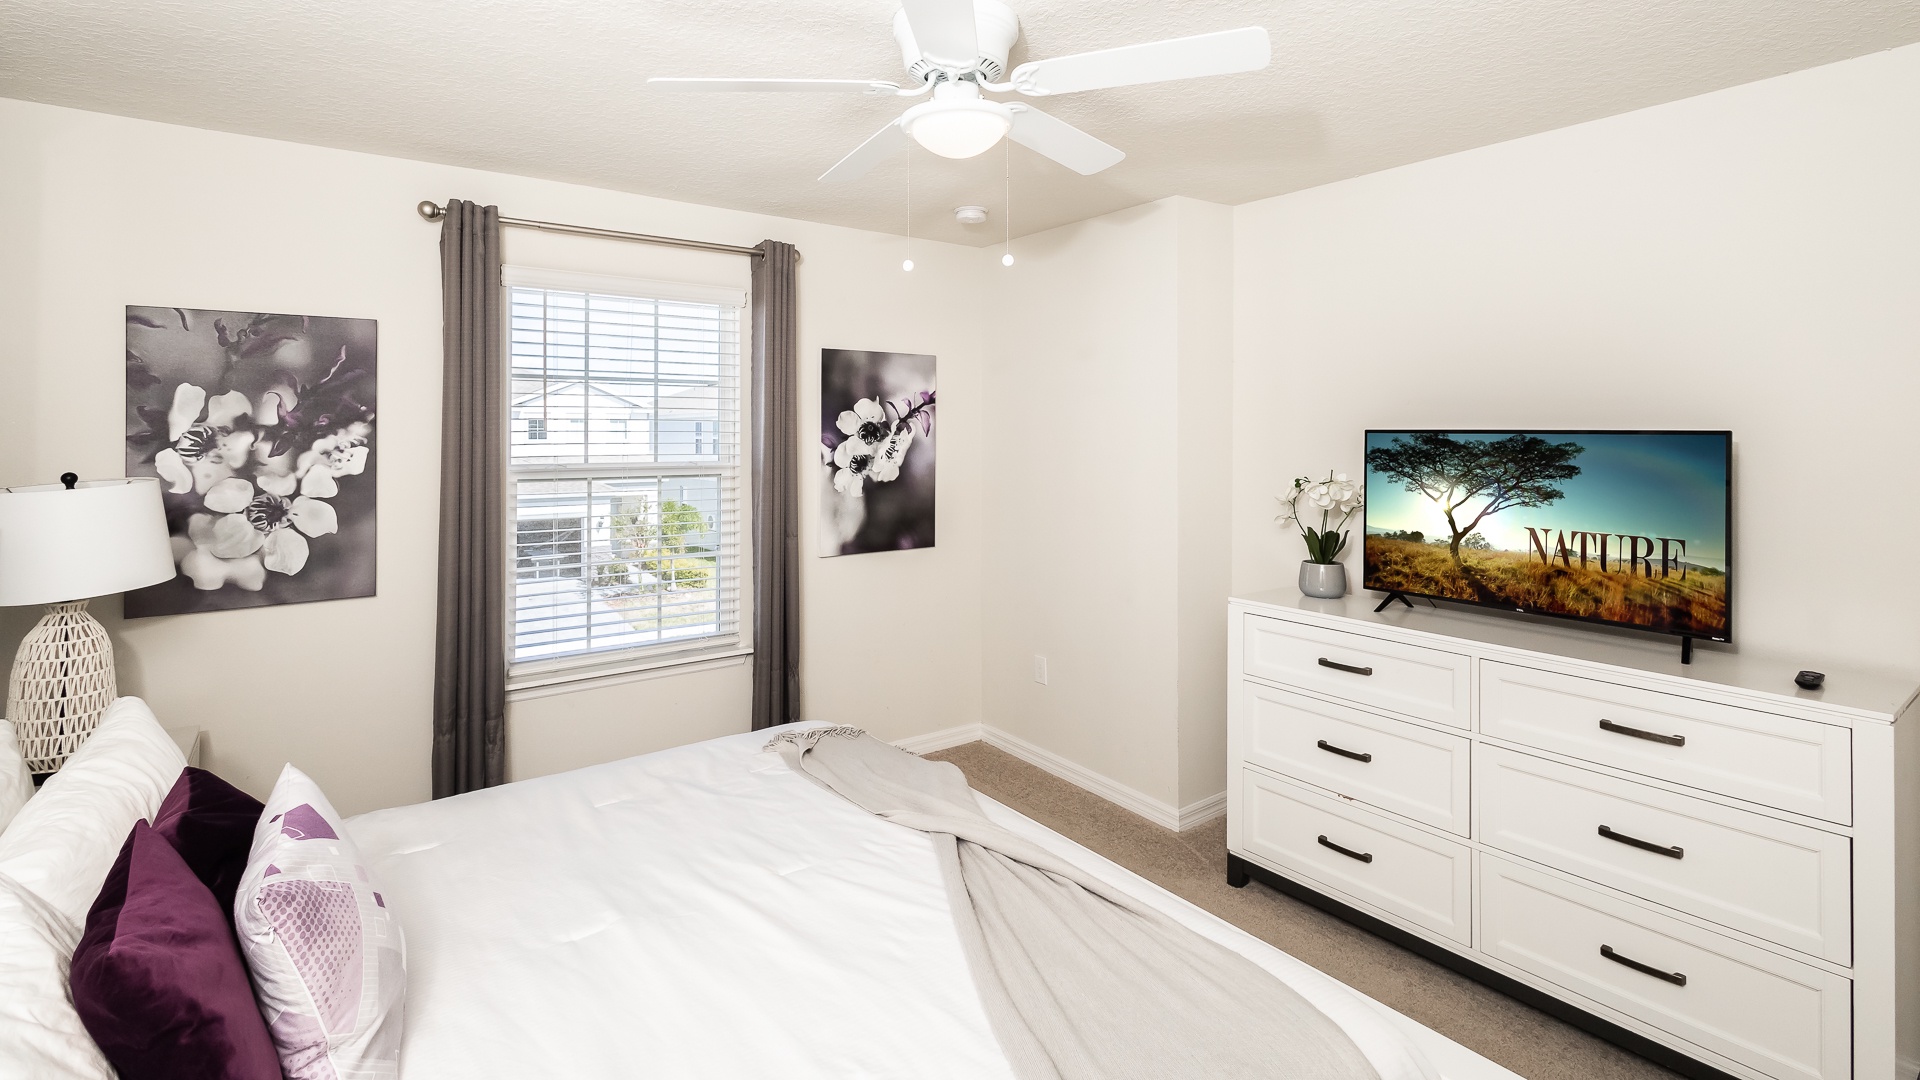 This chic 2nd floor king suite offers a private en suite, Smart TV, & ceiling fan